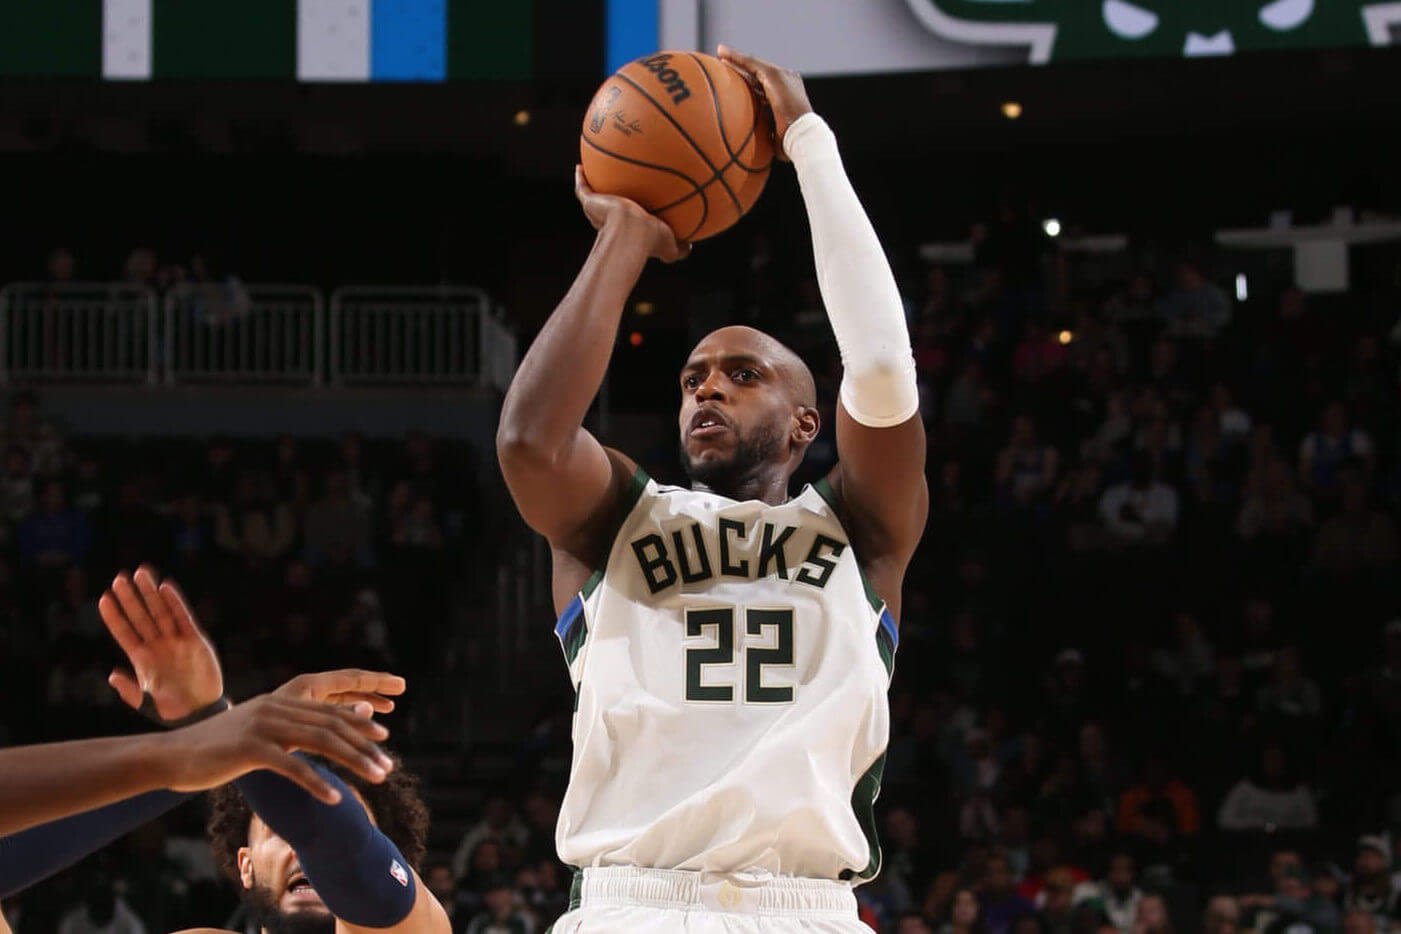 Bucks' Khris Middleton recovering from 2 ankle surgeries: Sources